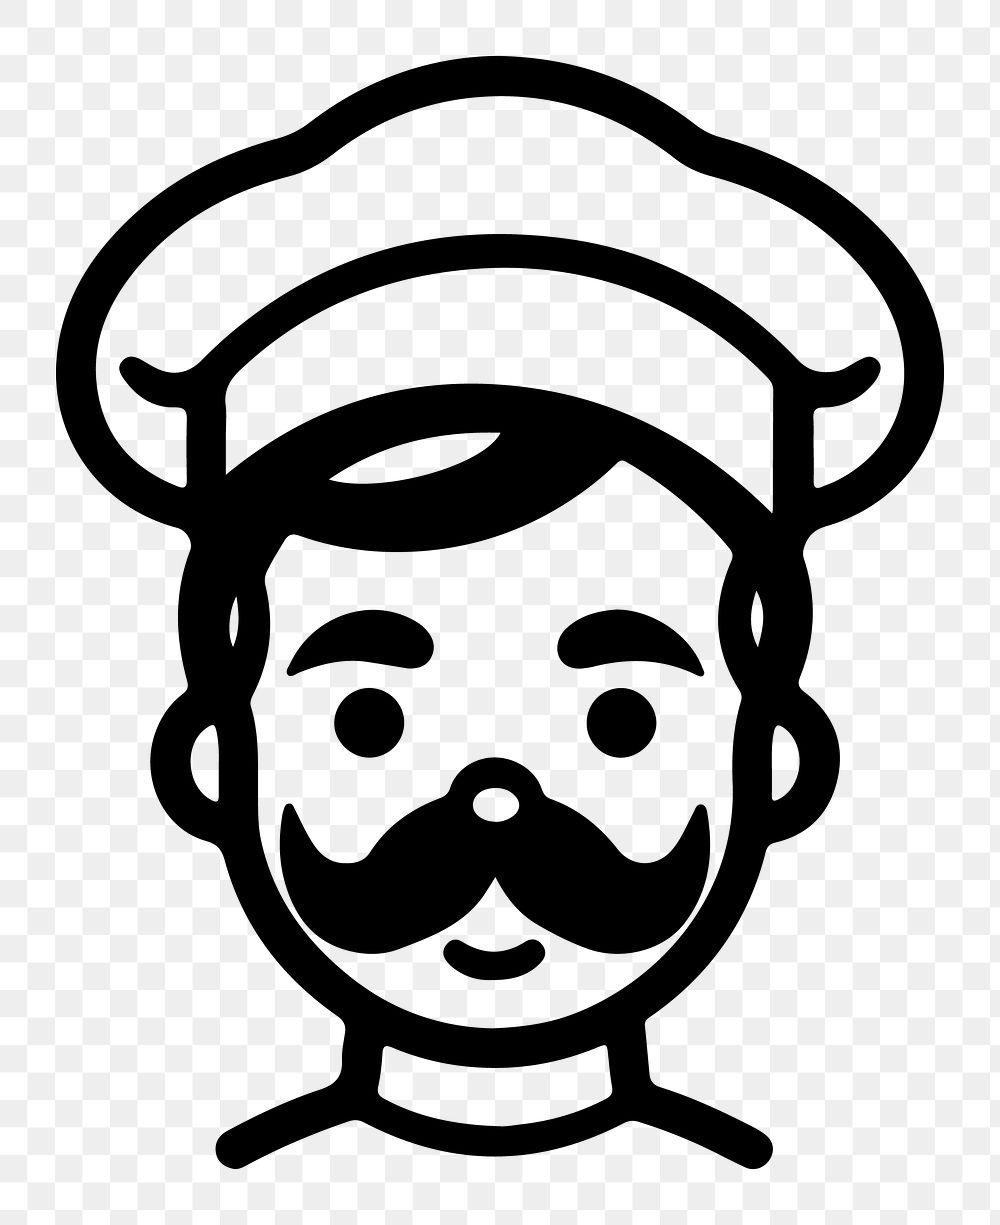 Chef png character line art, transparent background